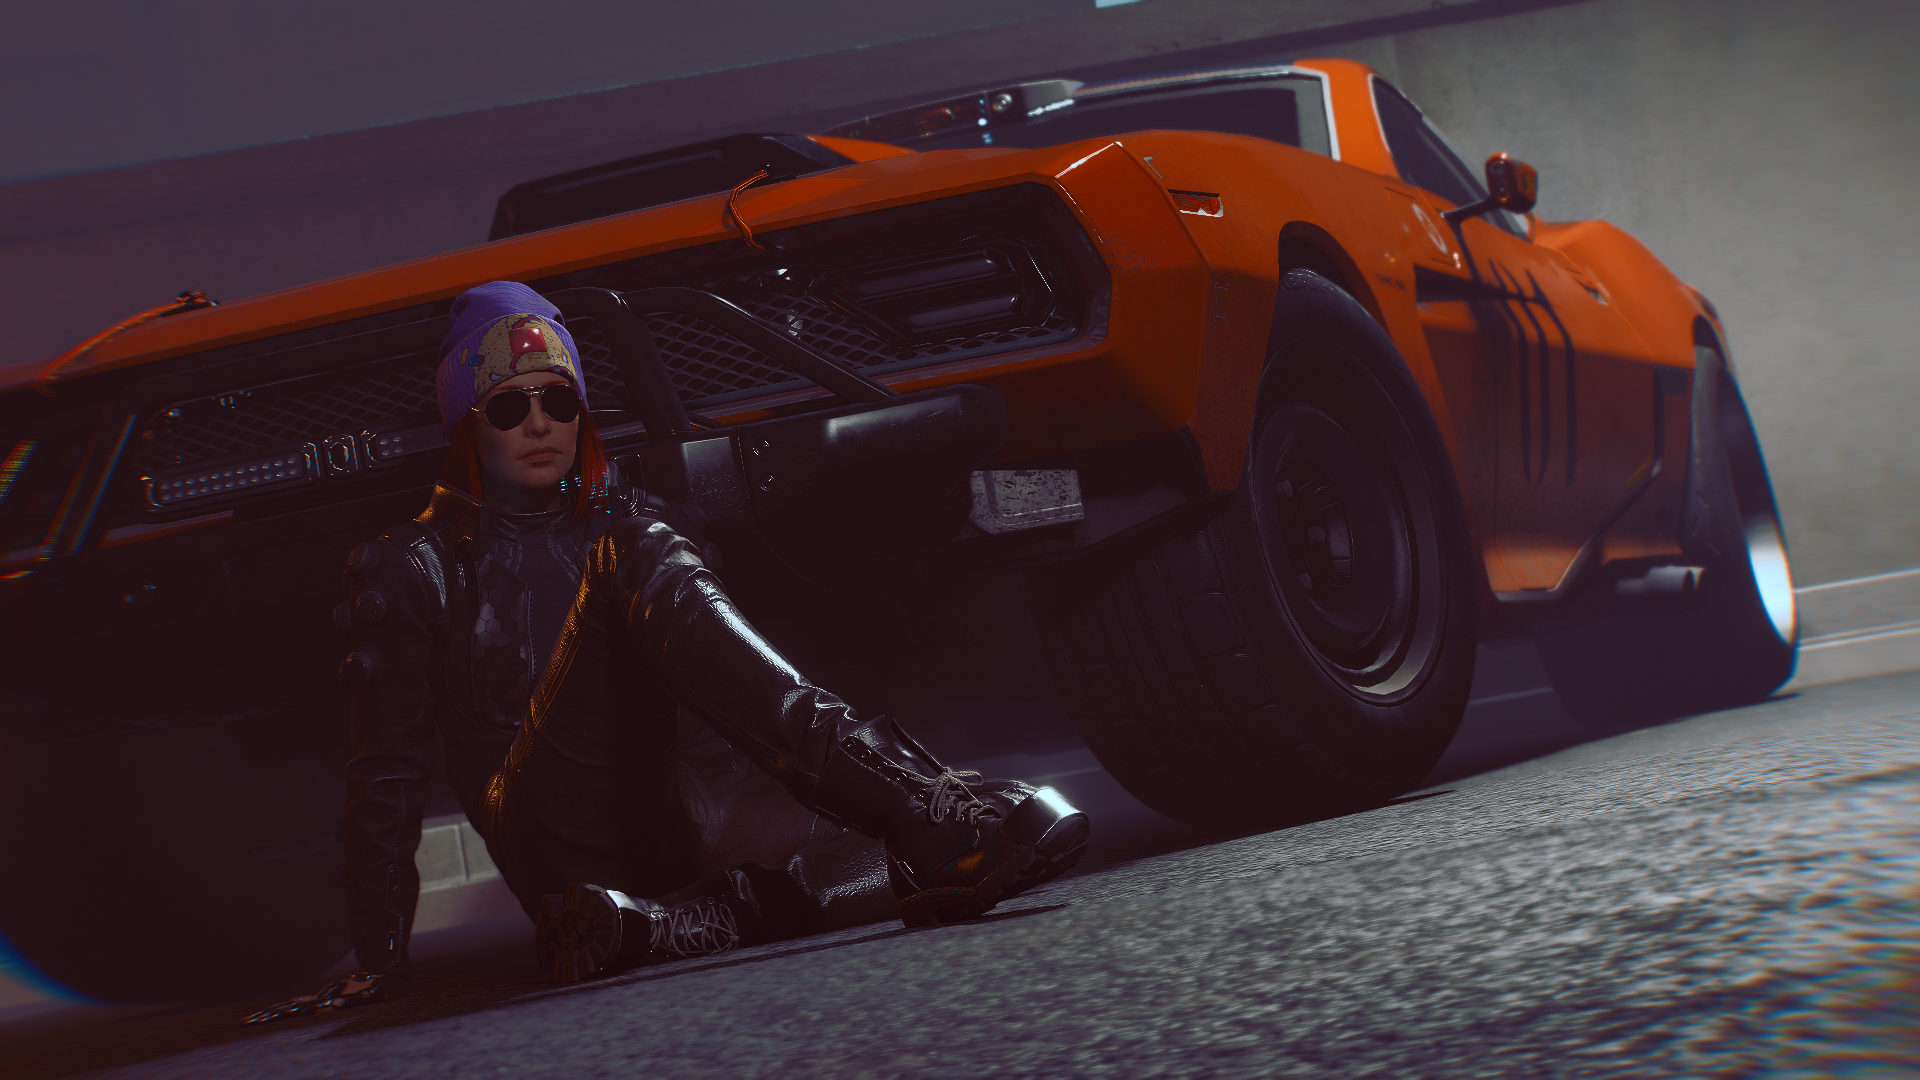 General 1920x1080 Cyberpunk 2077 low light digital art Quadra Type 66 video game art screen shot video game characters CGI video games on the ground sunglasses low-angle women with shades car vehicle red cars closed mouth shoe sole video game girls ground